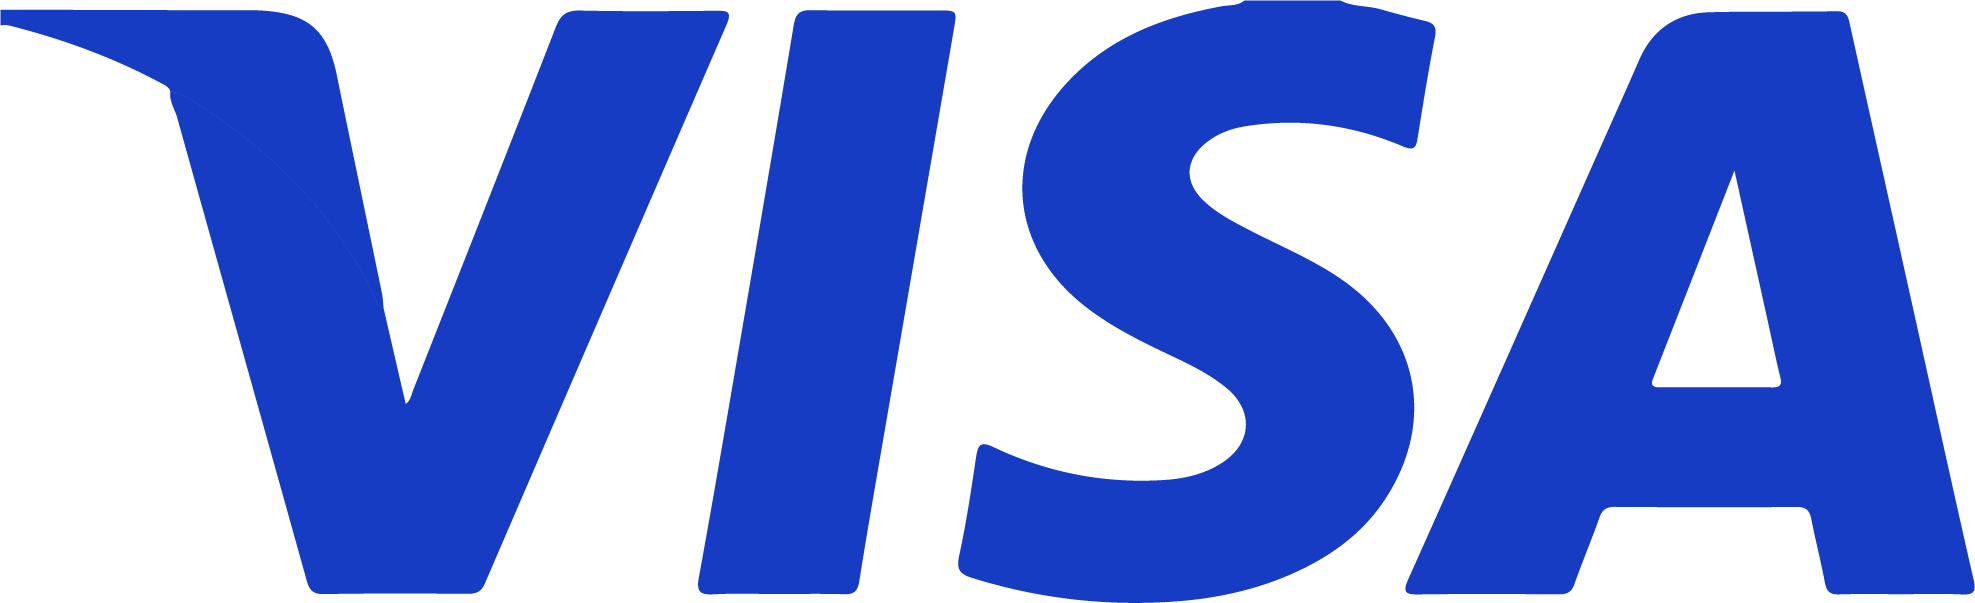 A logo of a well-known global payment technology company, recognized for facilitating electronic funds transfers throughout the world.